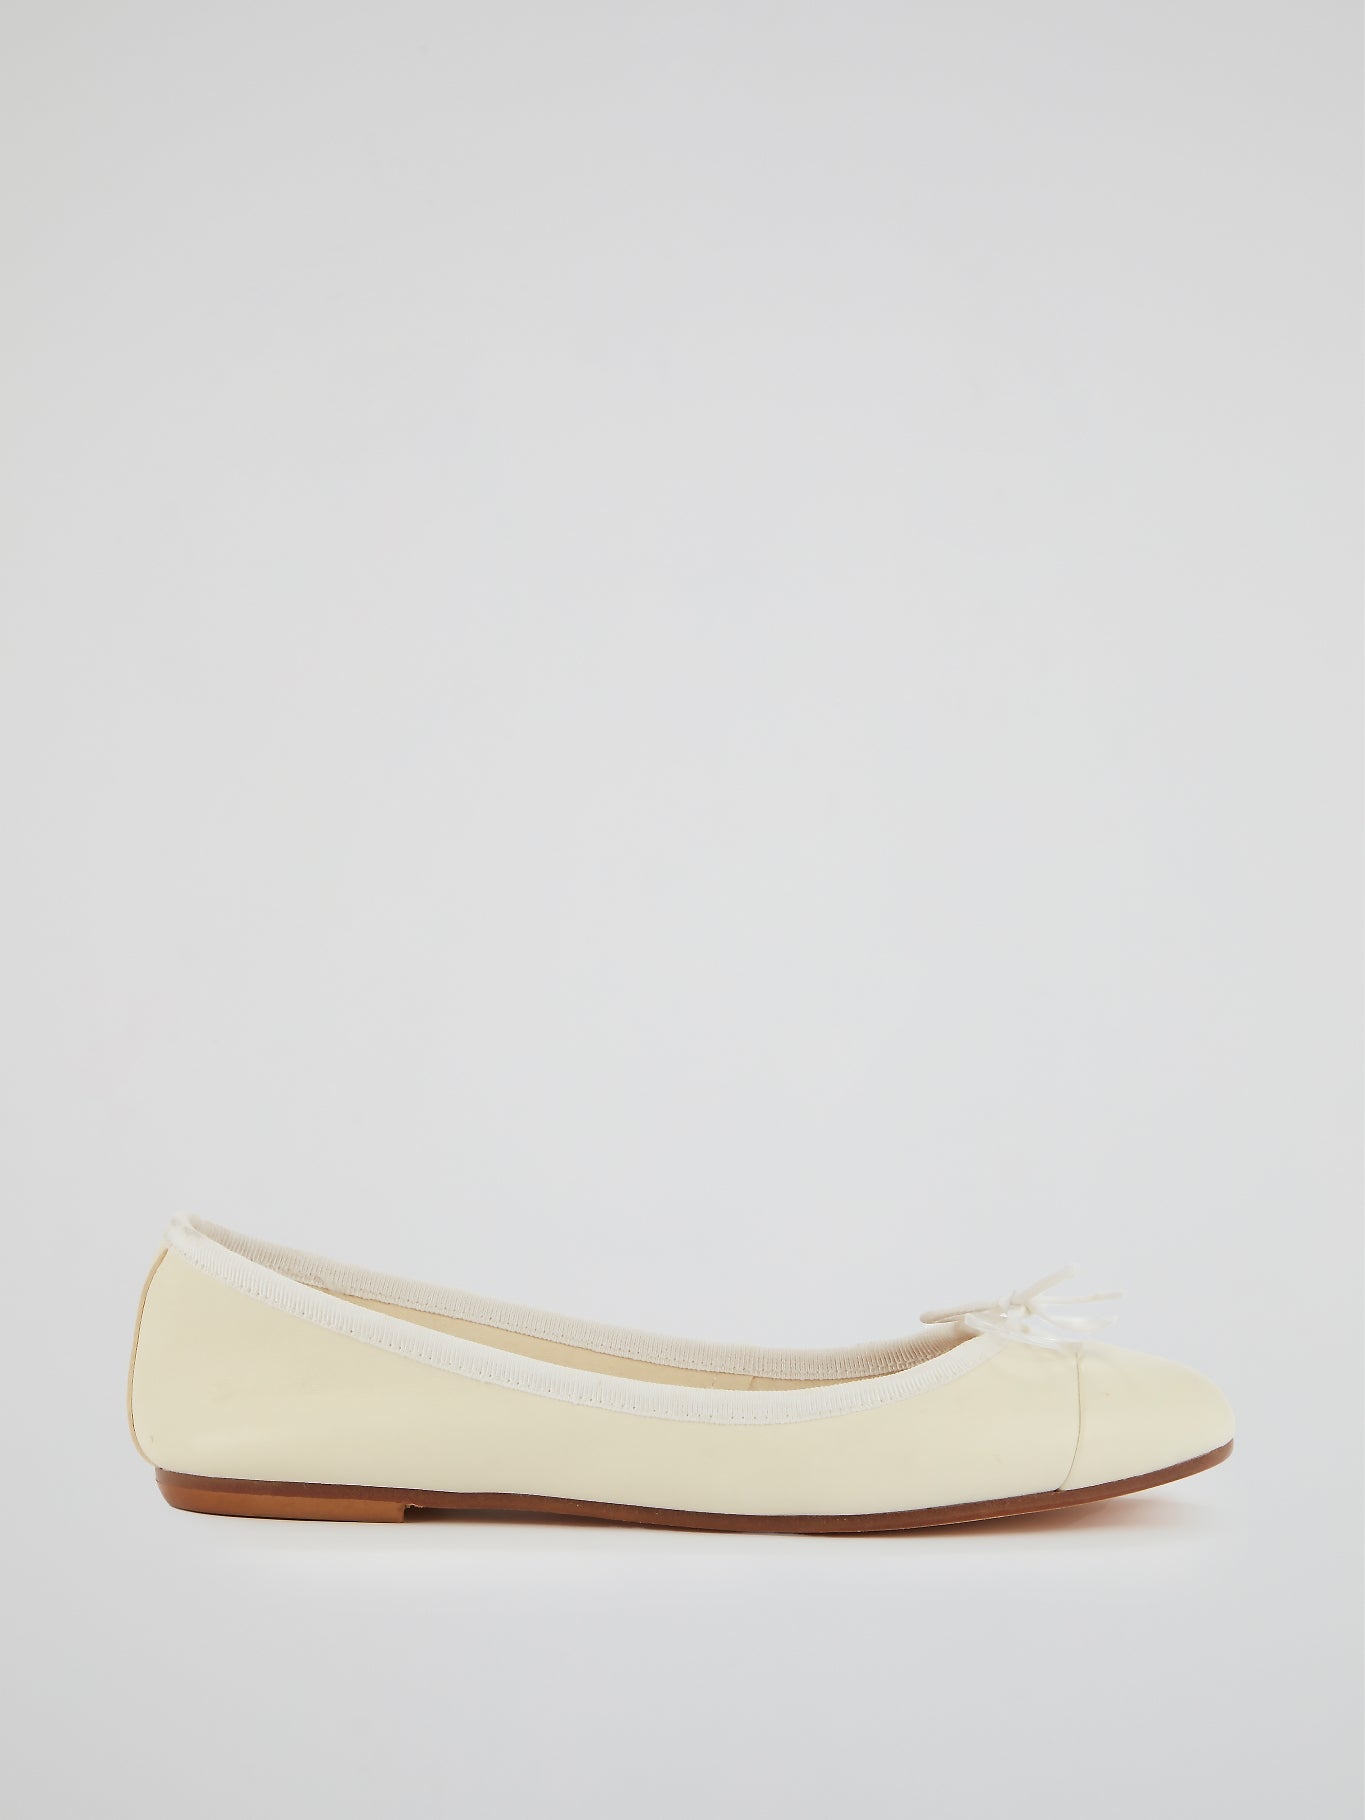 White Leather Ballerina Shoes